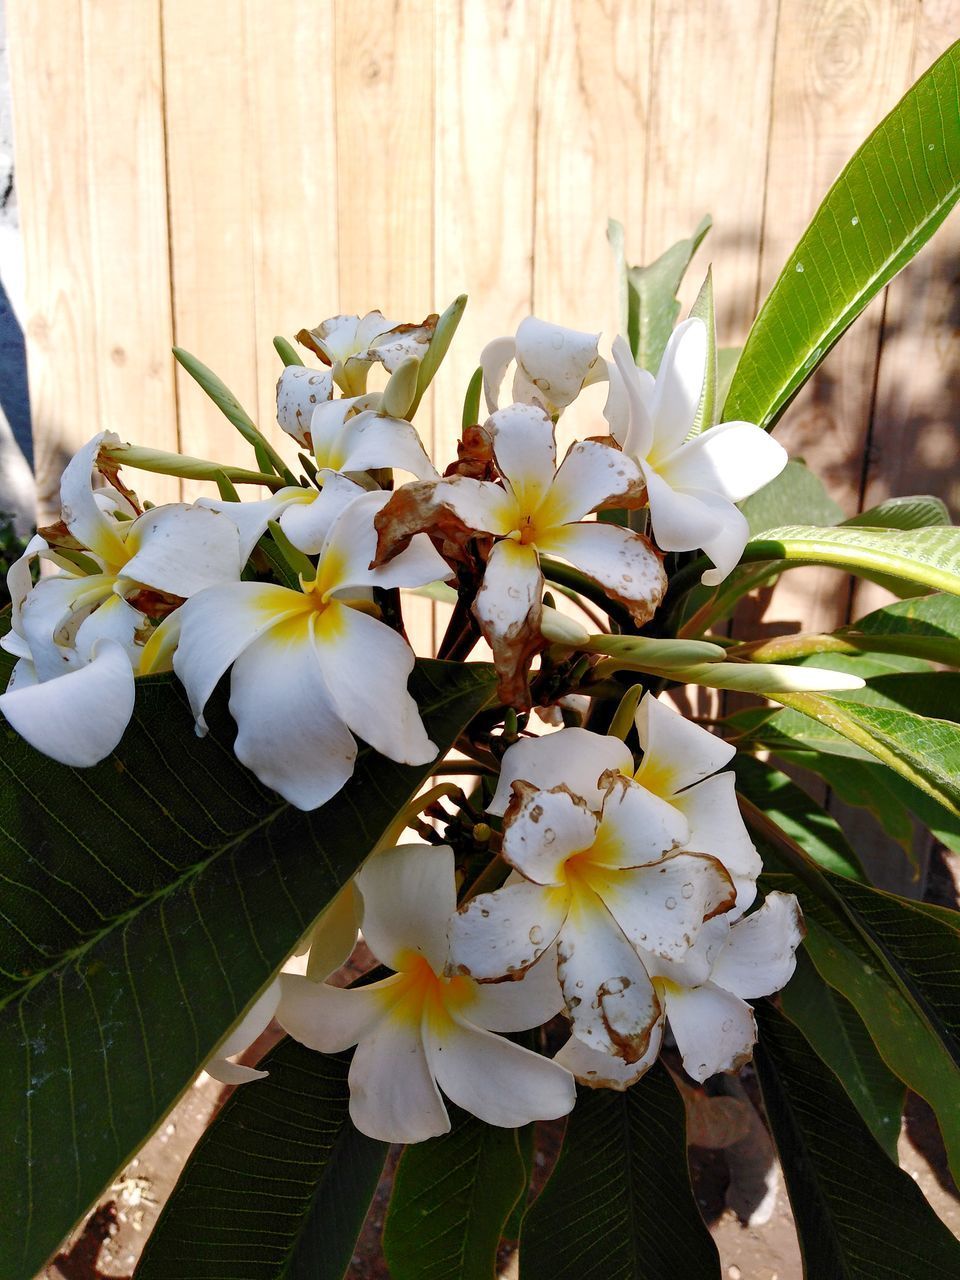 CLOSE-UP OF WHITE FLOWERING PLANT IN BLOOM